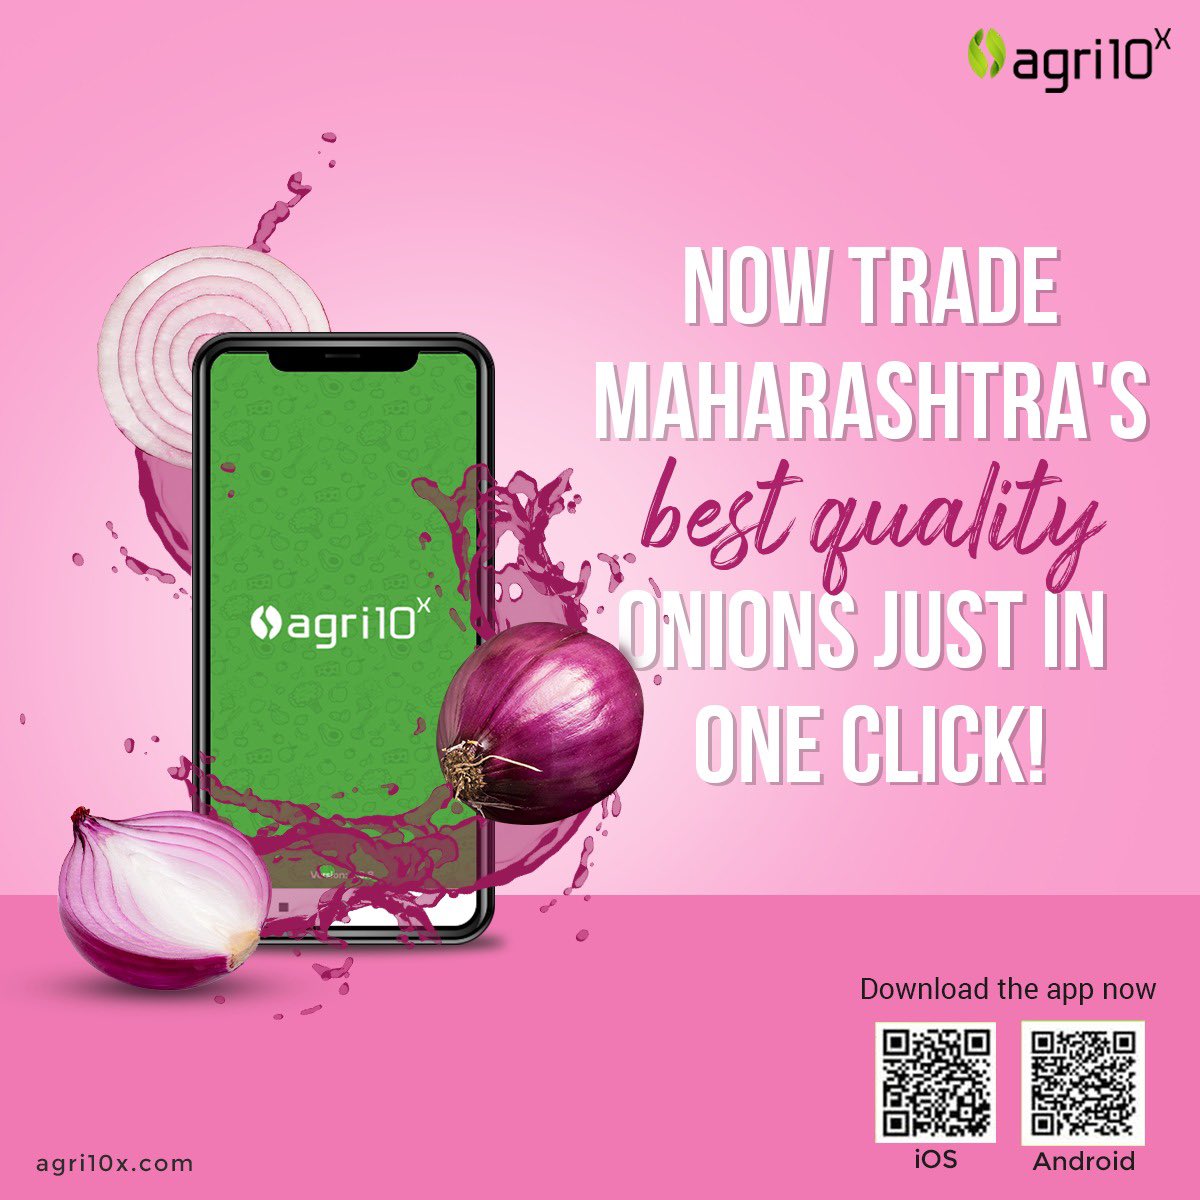 Maharastra's best quality onions now available on Agri10x. Download the app right away and begin trading at the best prices! #TradeNow #BestDeals #agri10x